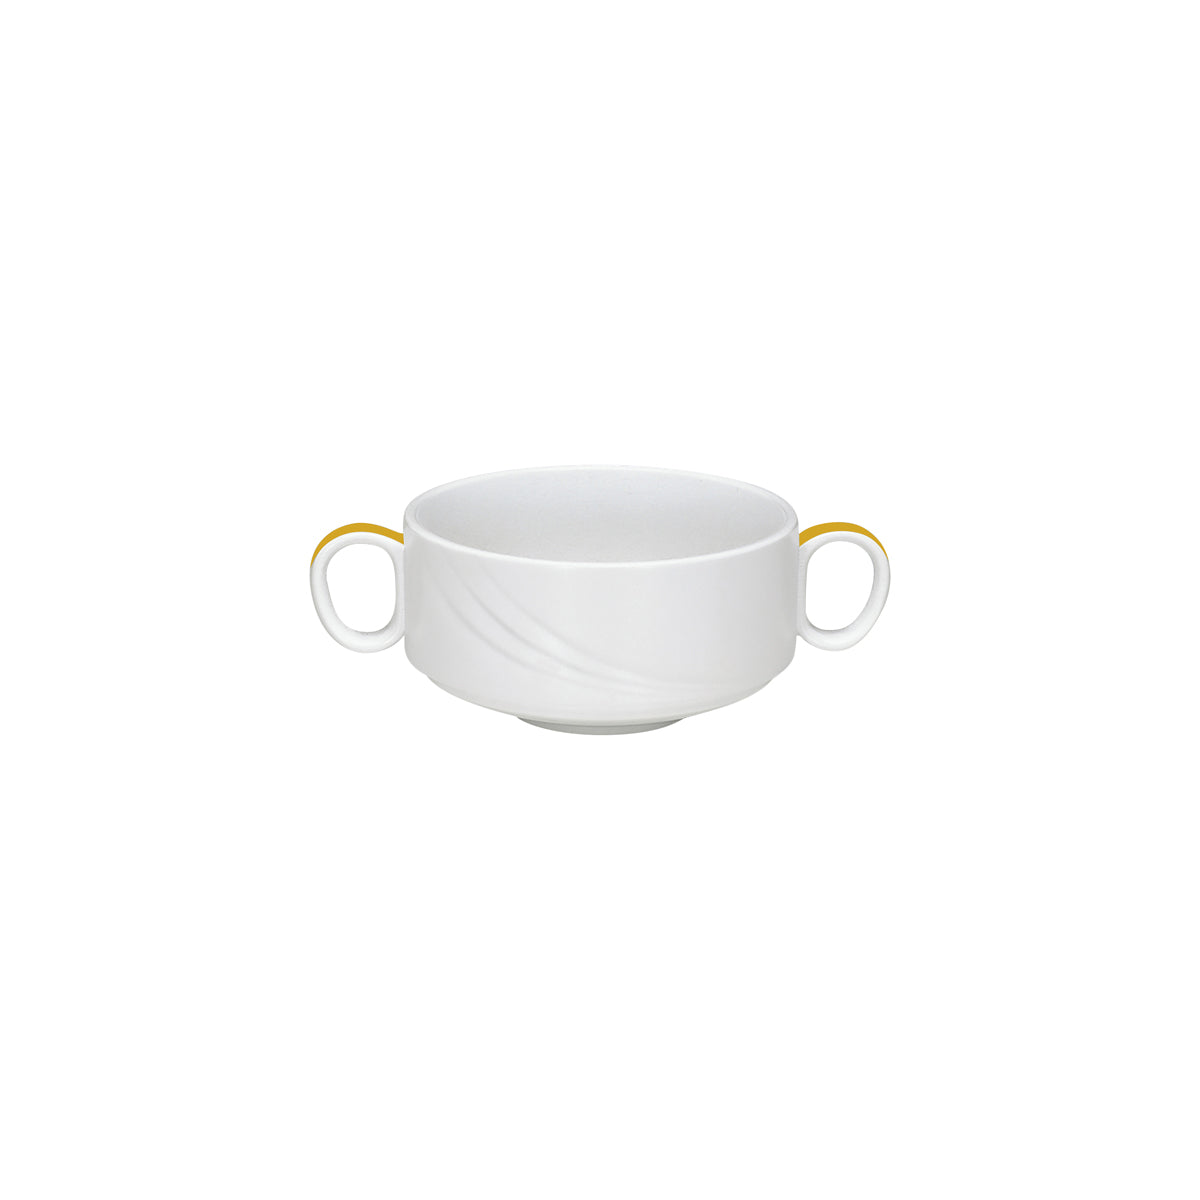 SH9182740/62981 Donna Senior Decor Stackable Soup Cup with 2 Handles with Yellow Band 108x66mm / 480ml Tomkin Australia Hospitality Supplies